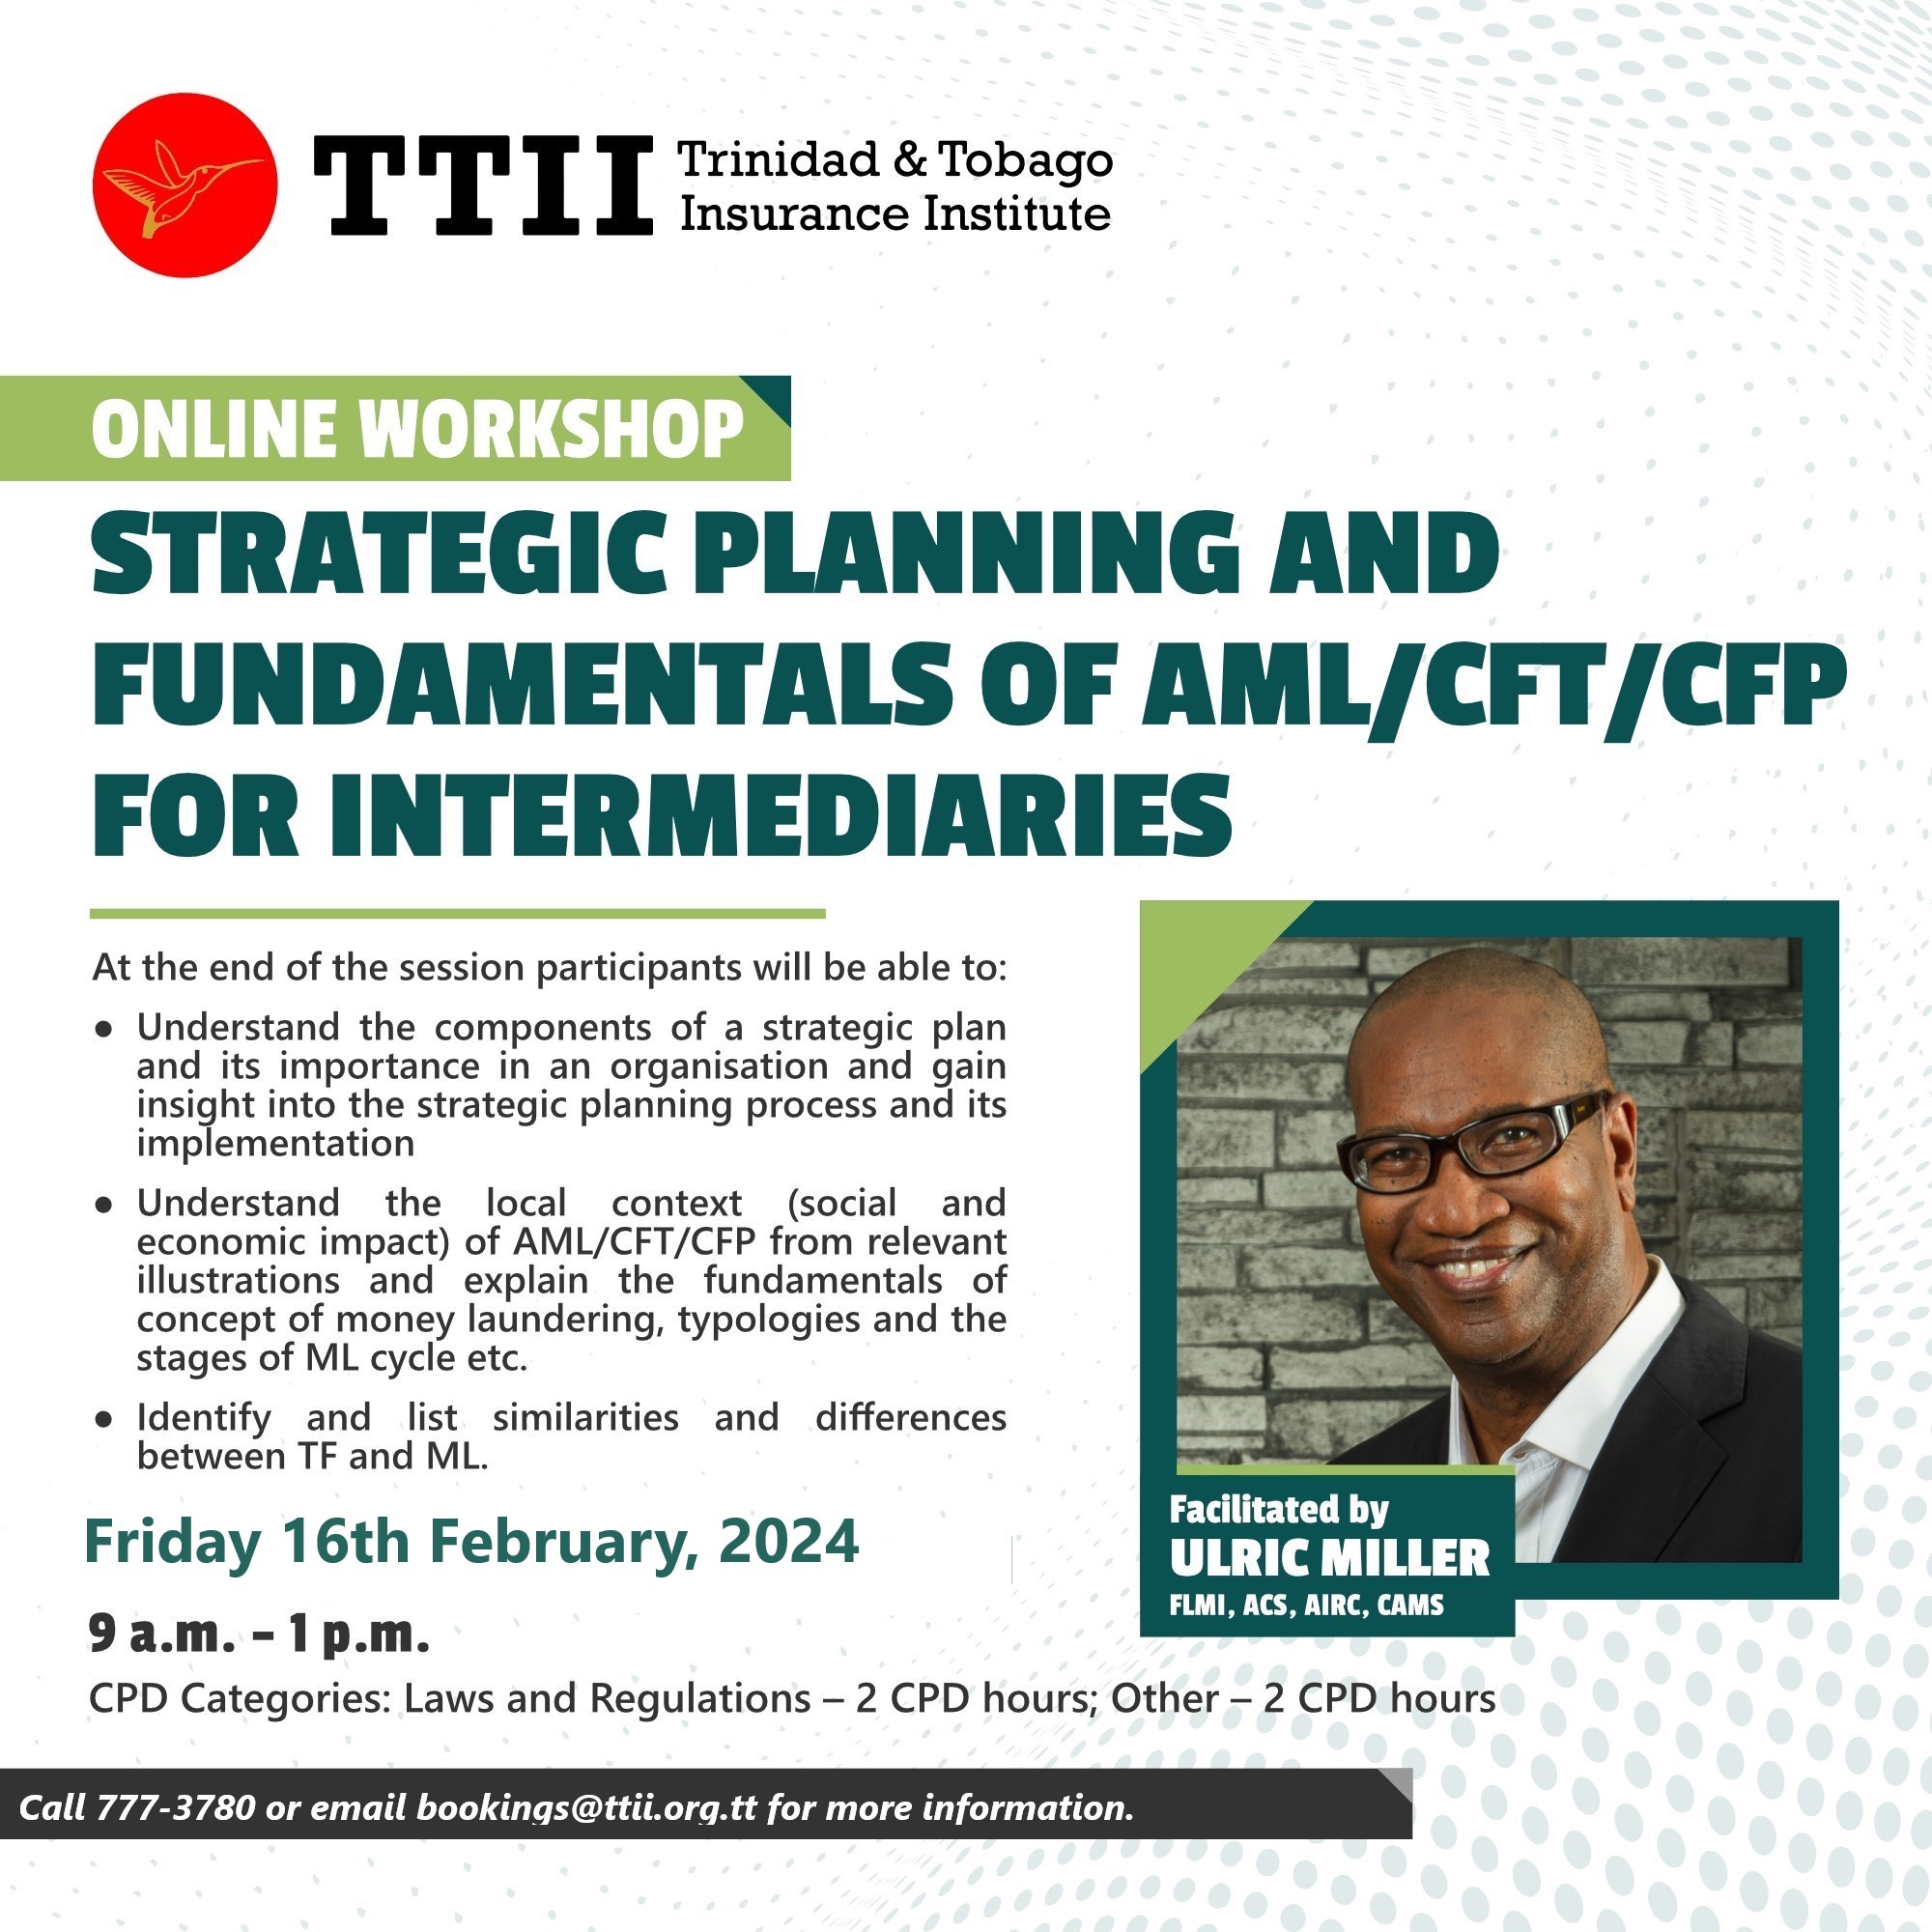 Strategic Planning and Fundamentals of AML/CFT/CFP for Intermediaries